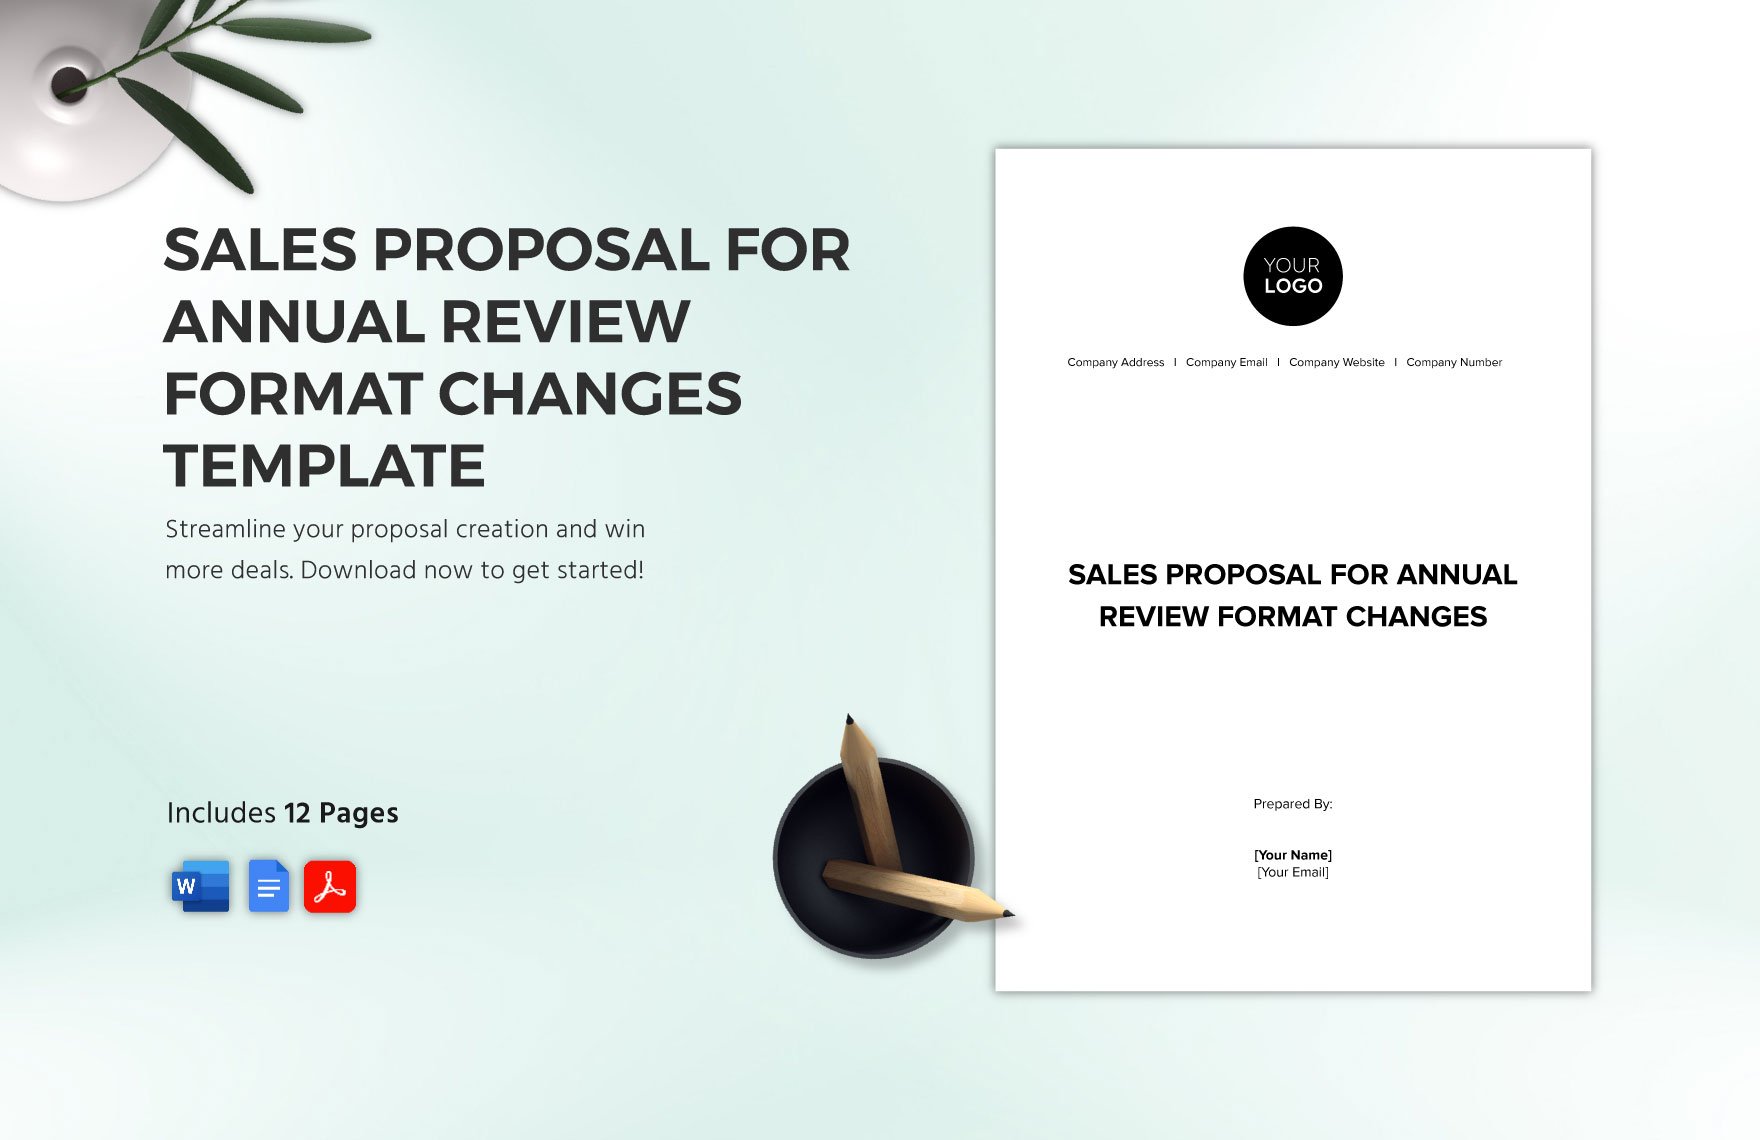 Sales Proposal for Annual Review Format Changes Template